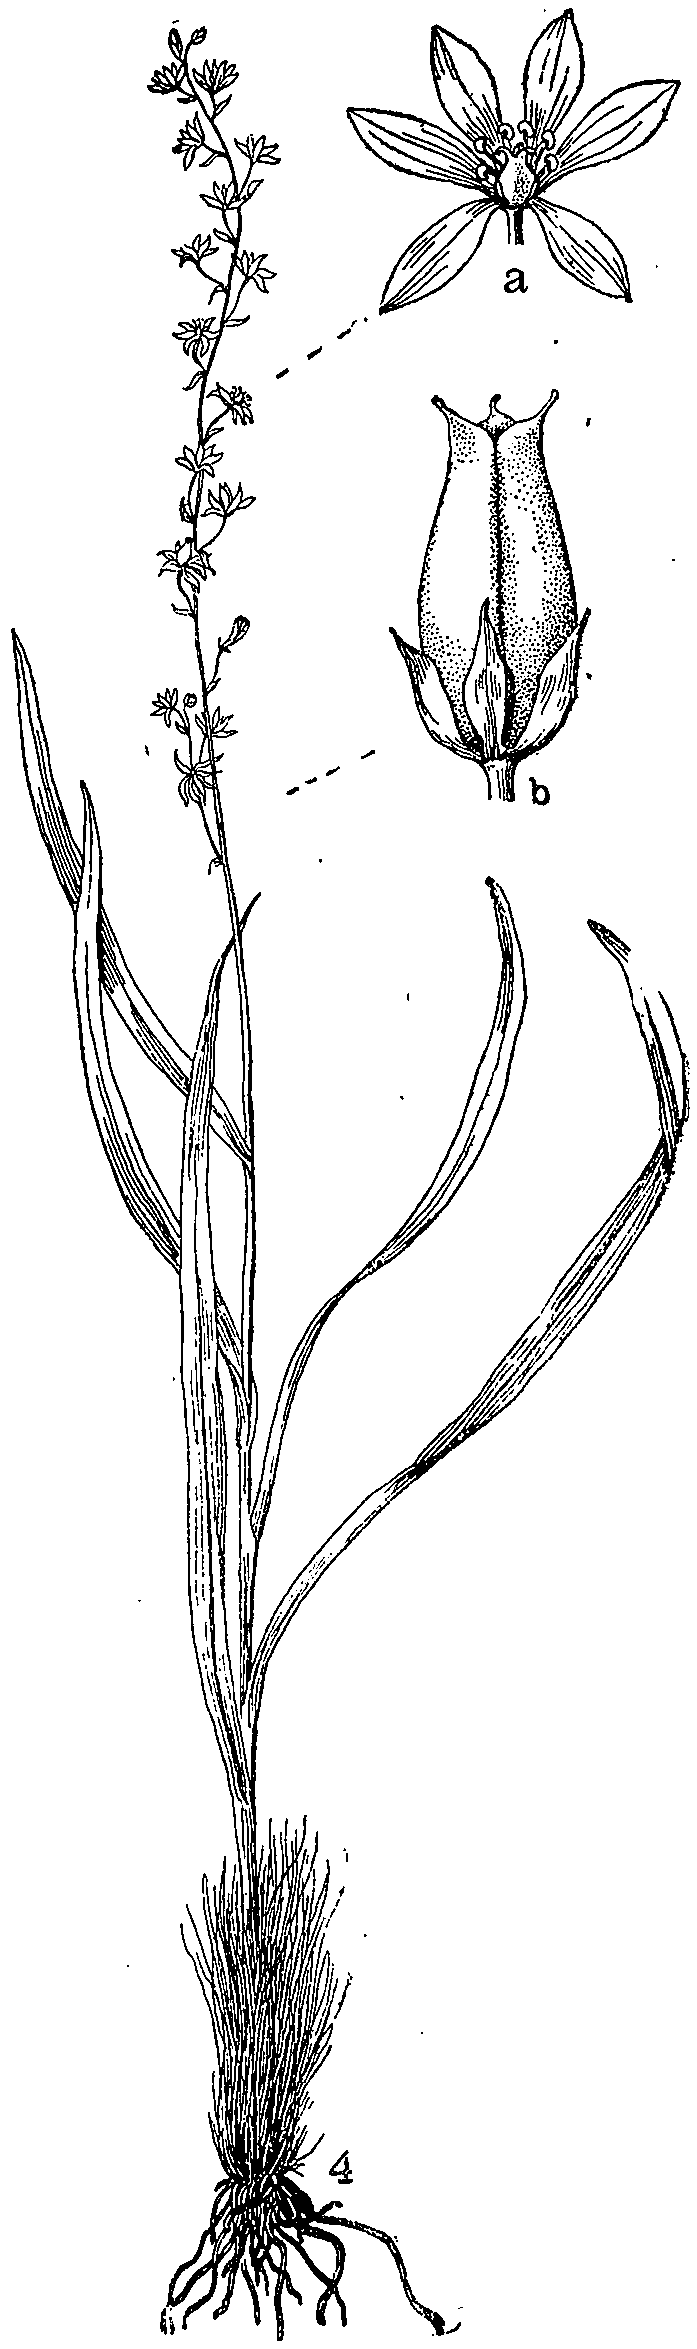 Acelidanthus_anticleoides_4a.png